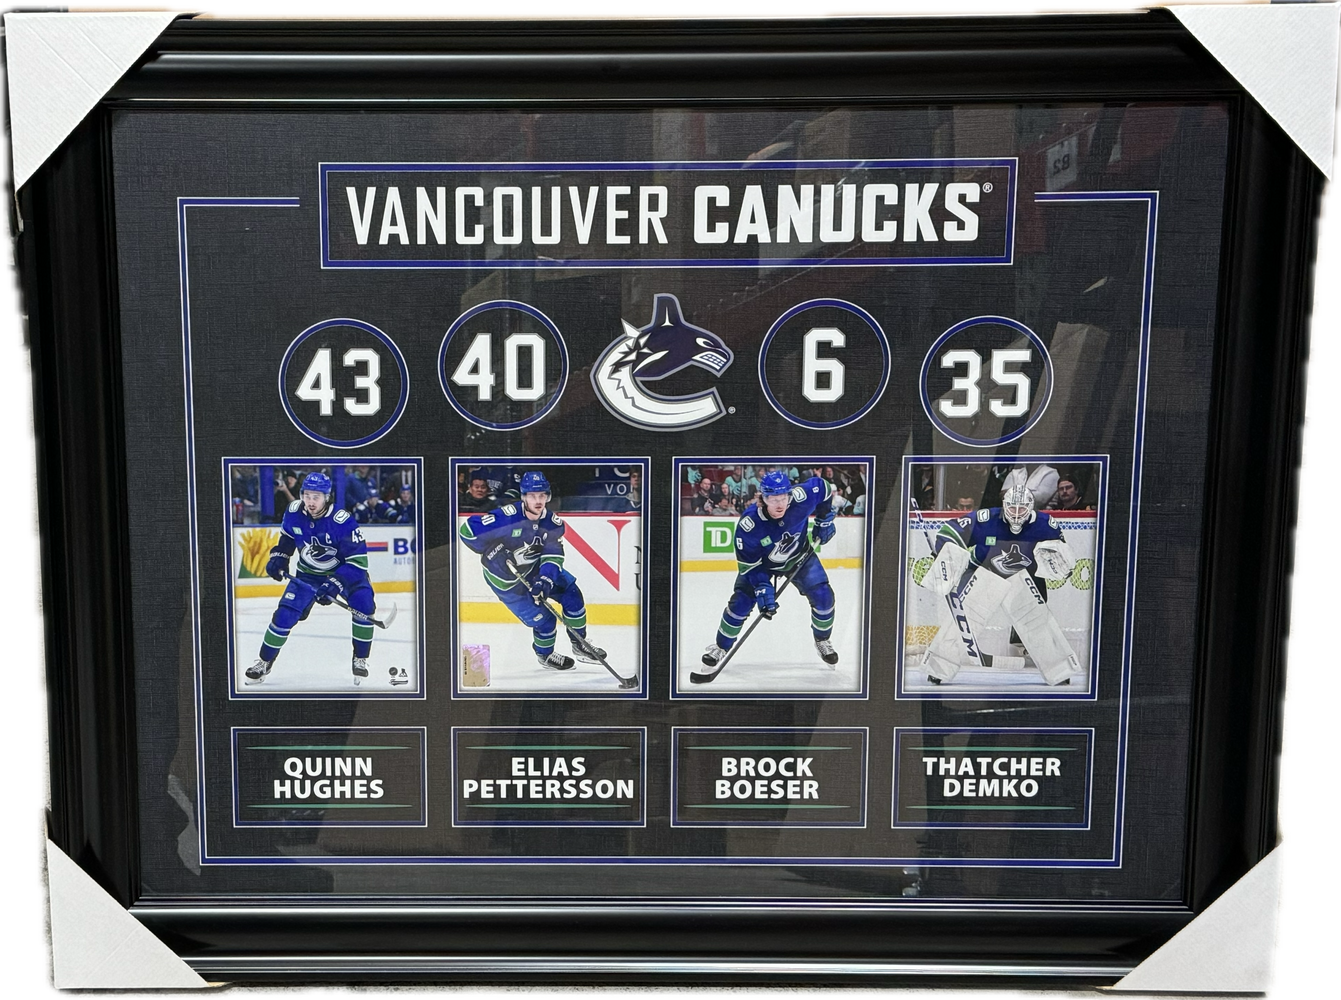 Vancouver Canucks Best Of The Best Framed Collage - Pastime Sports & Games